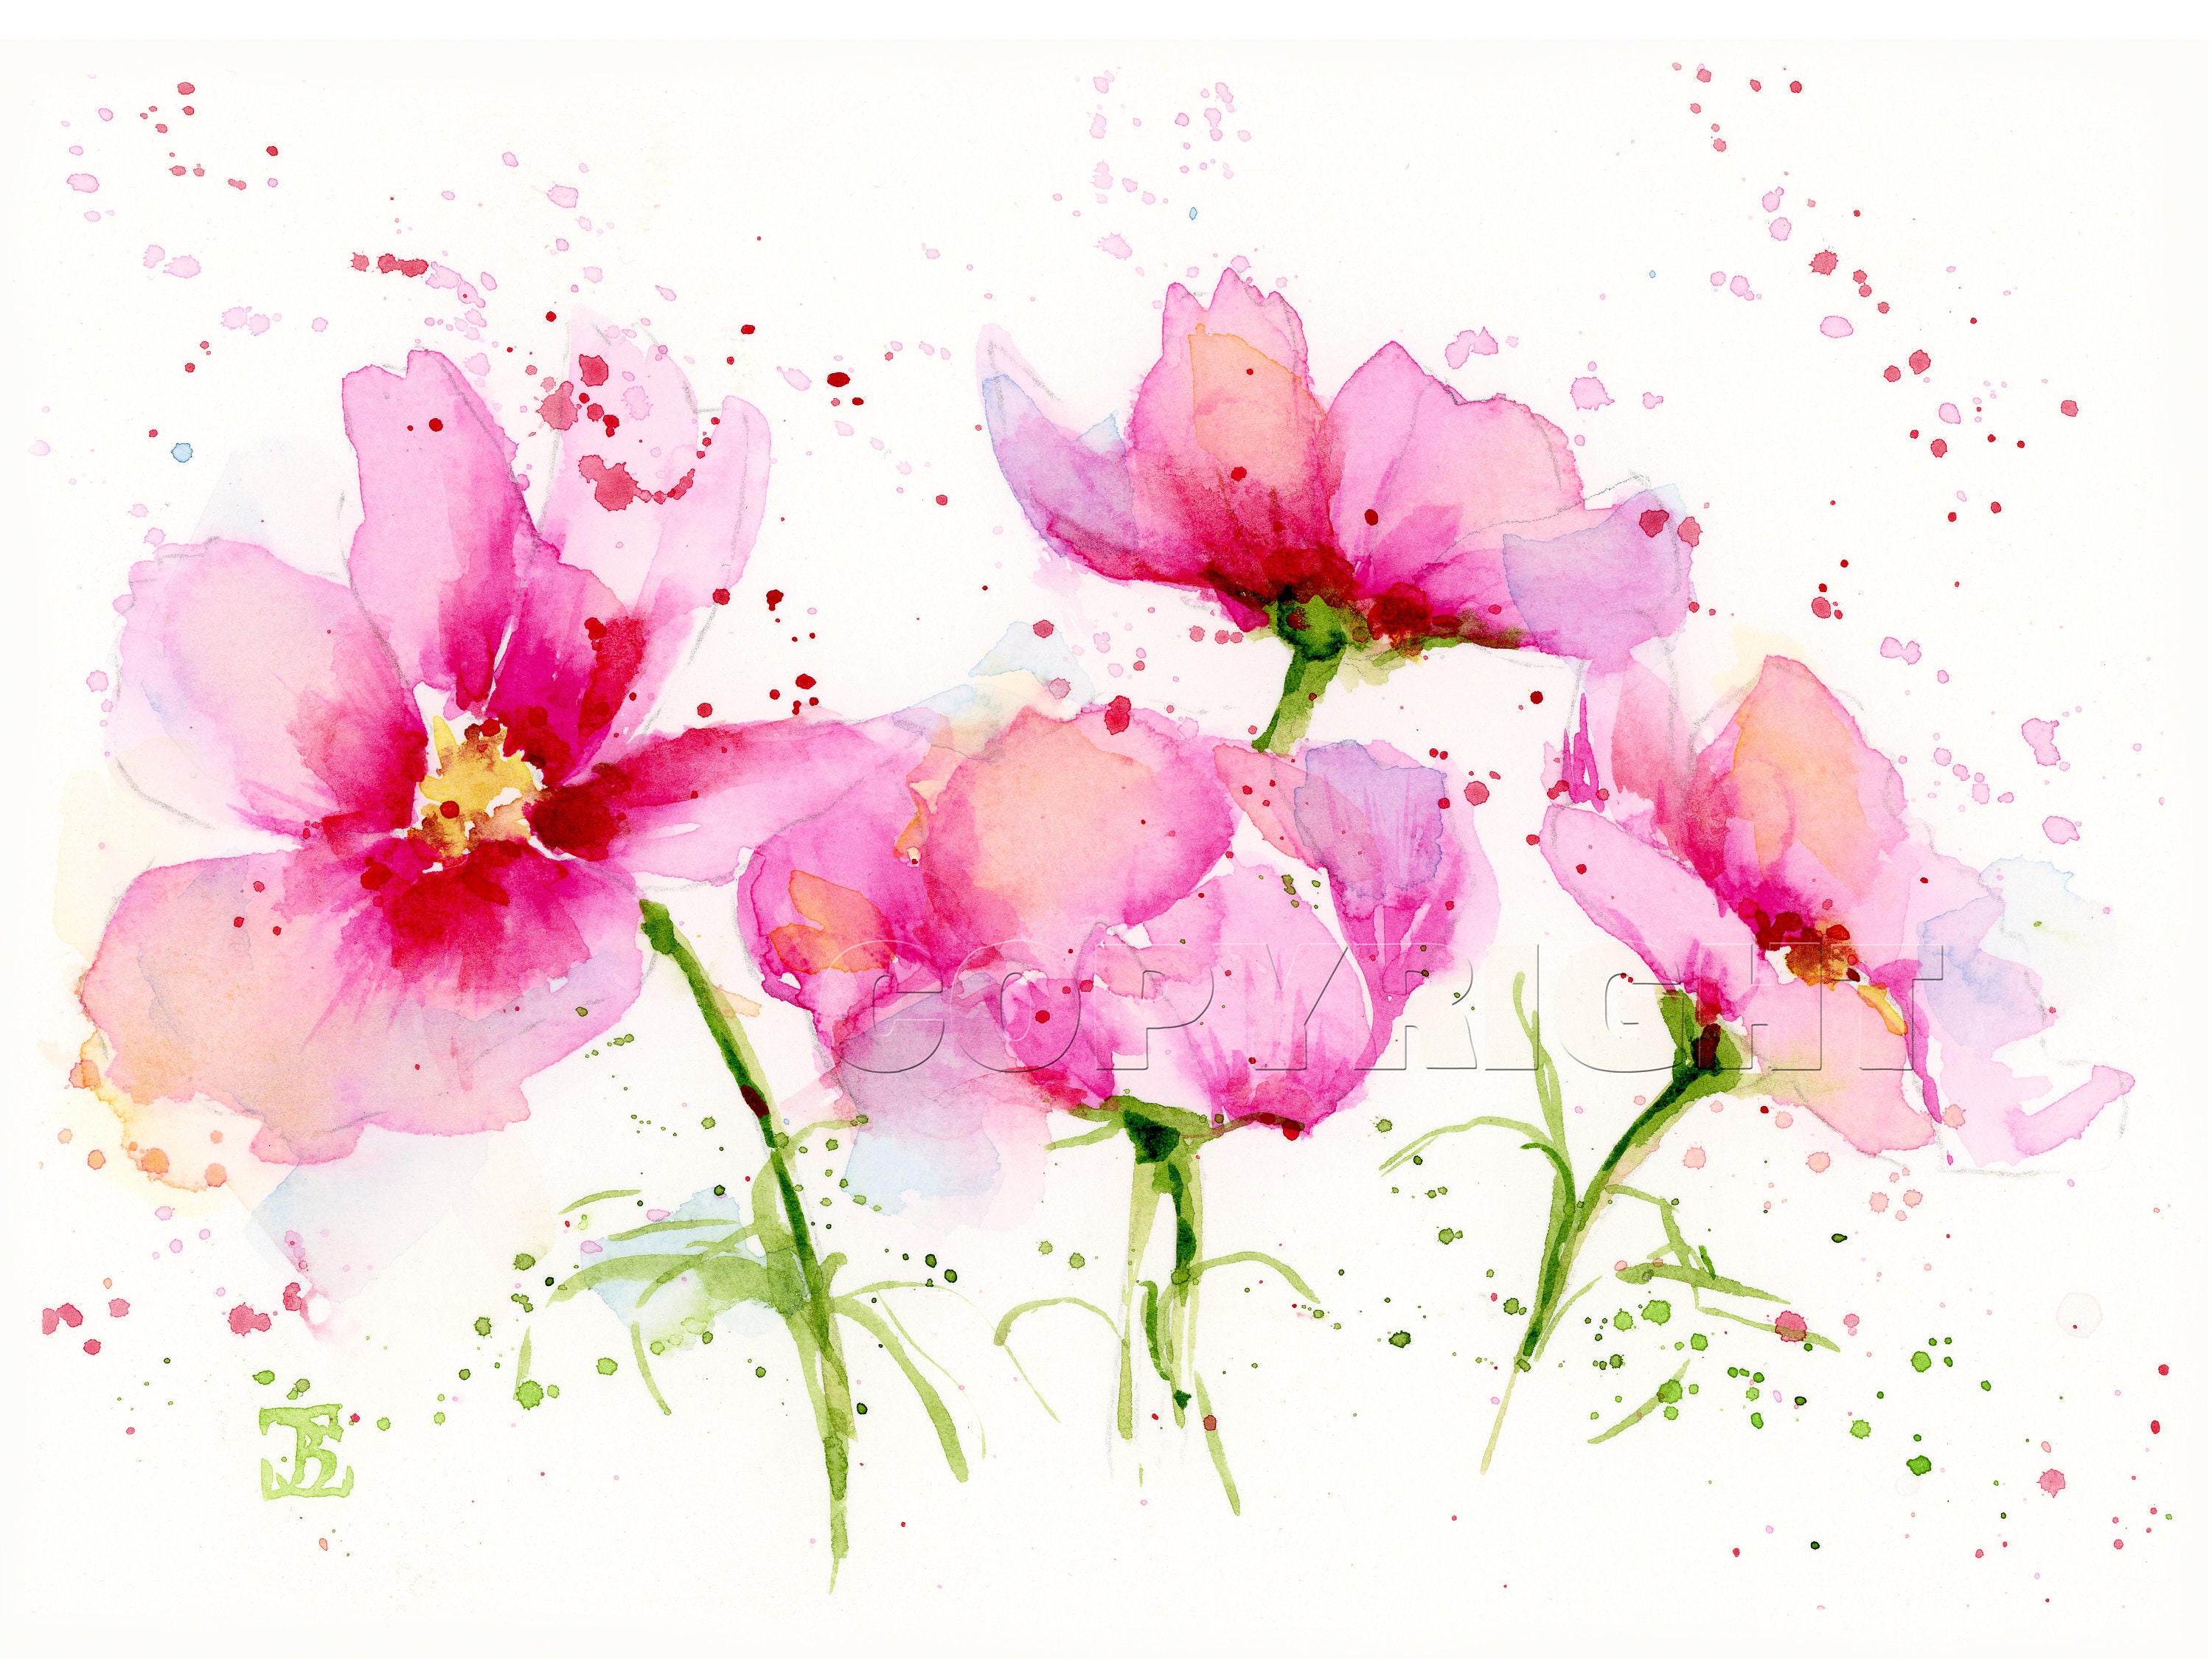 PINK FLOWERS Print, Flowers Watercolor Painting, Pink Floral Art, Home  Decor, Flowers Wall Art, Gift Idea, Bobapainting, Wall Art, Bedroom 